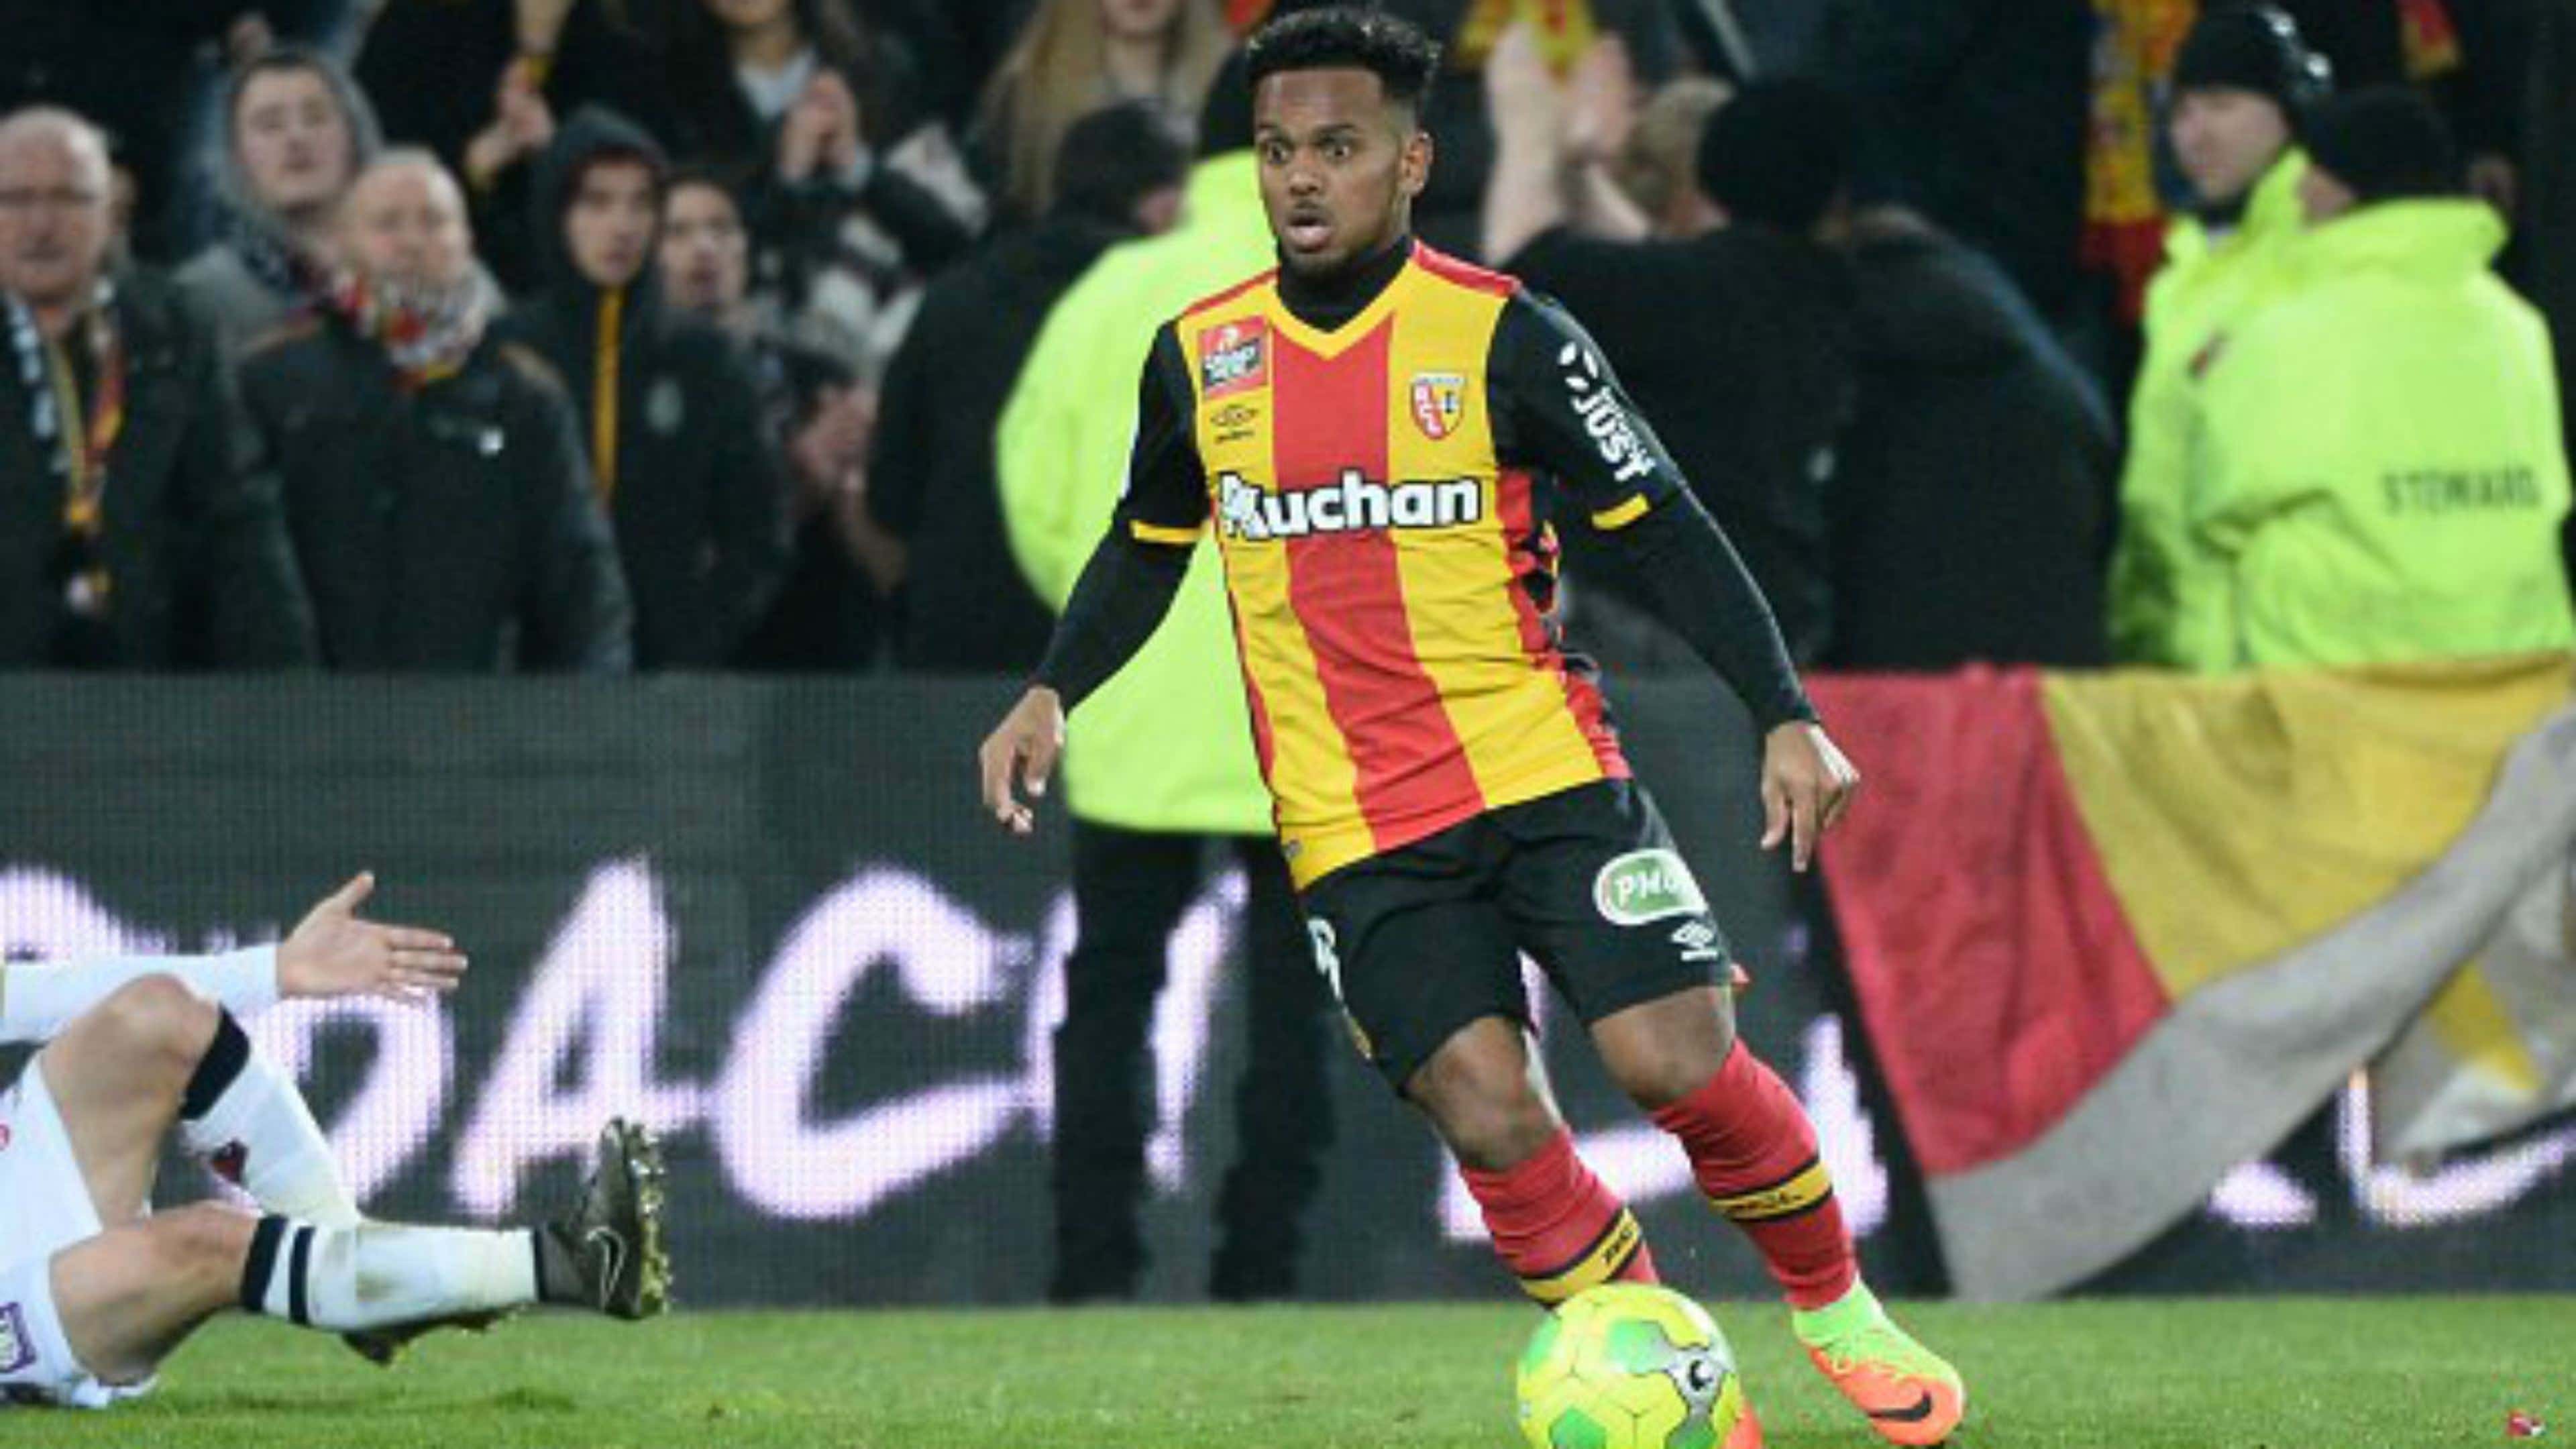 The Polish connection at French club RC Lens - Outside Write